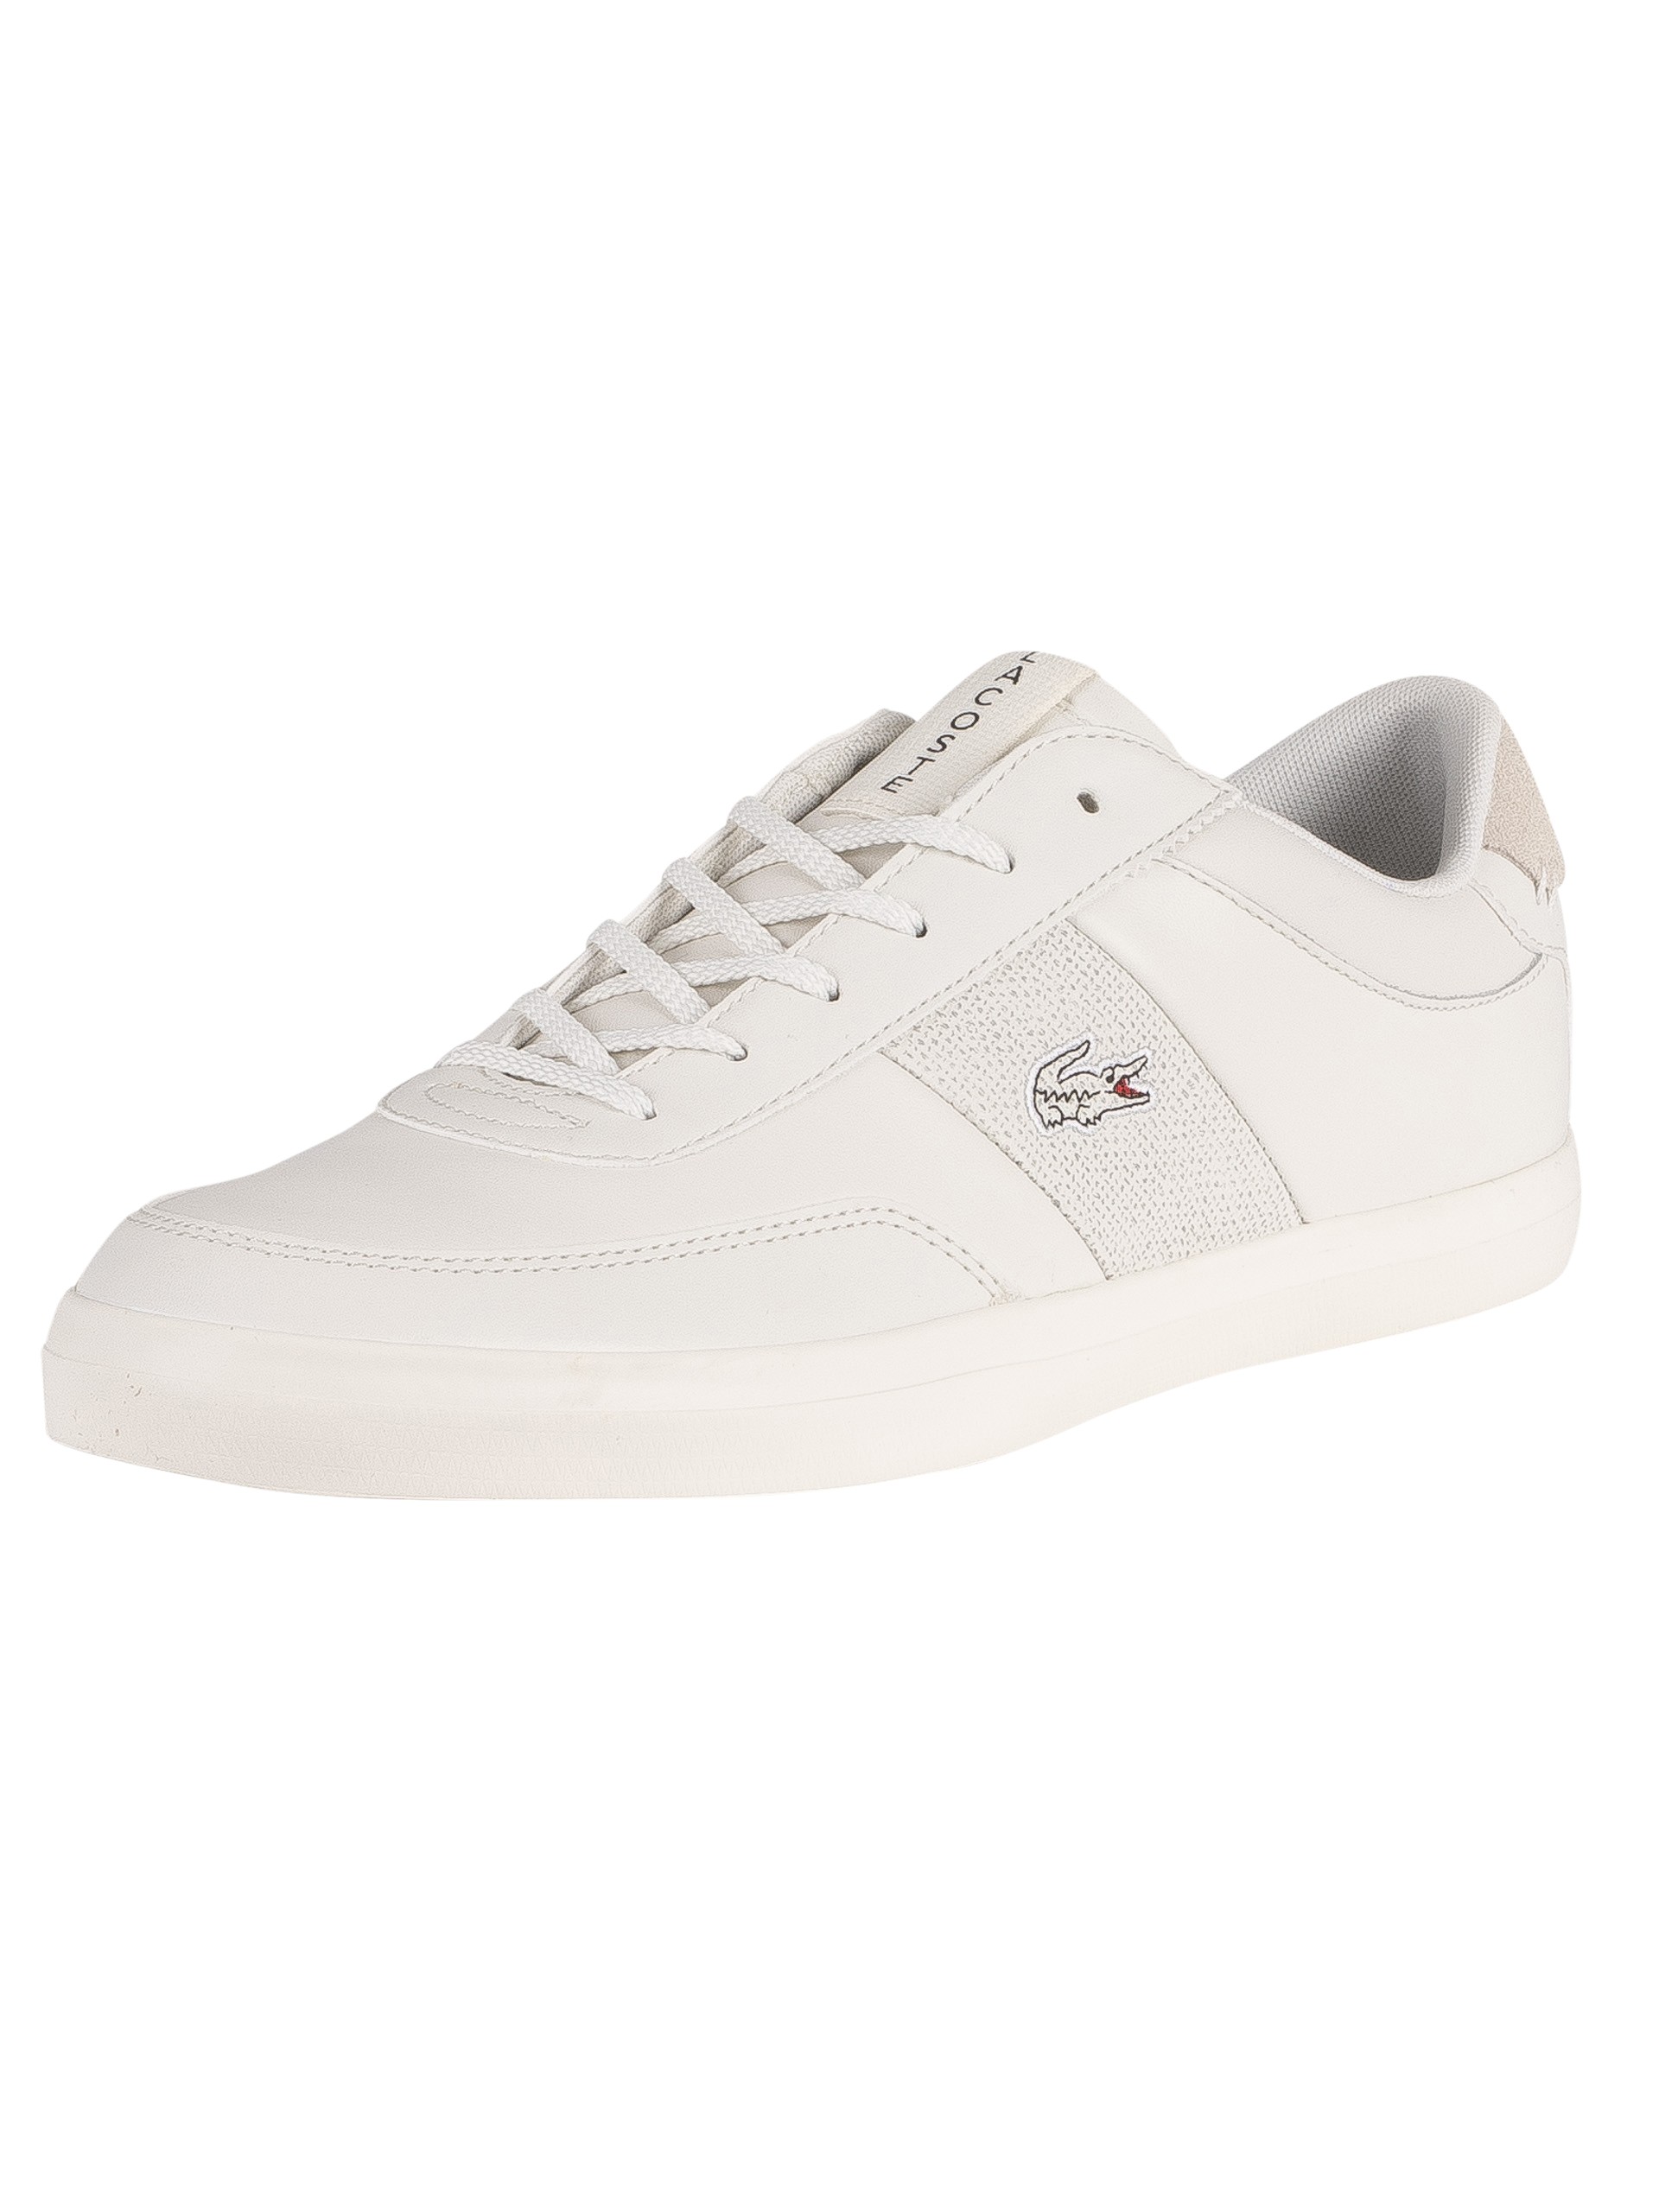 lacoste court master sneakers outlet 